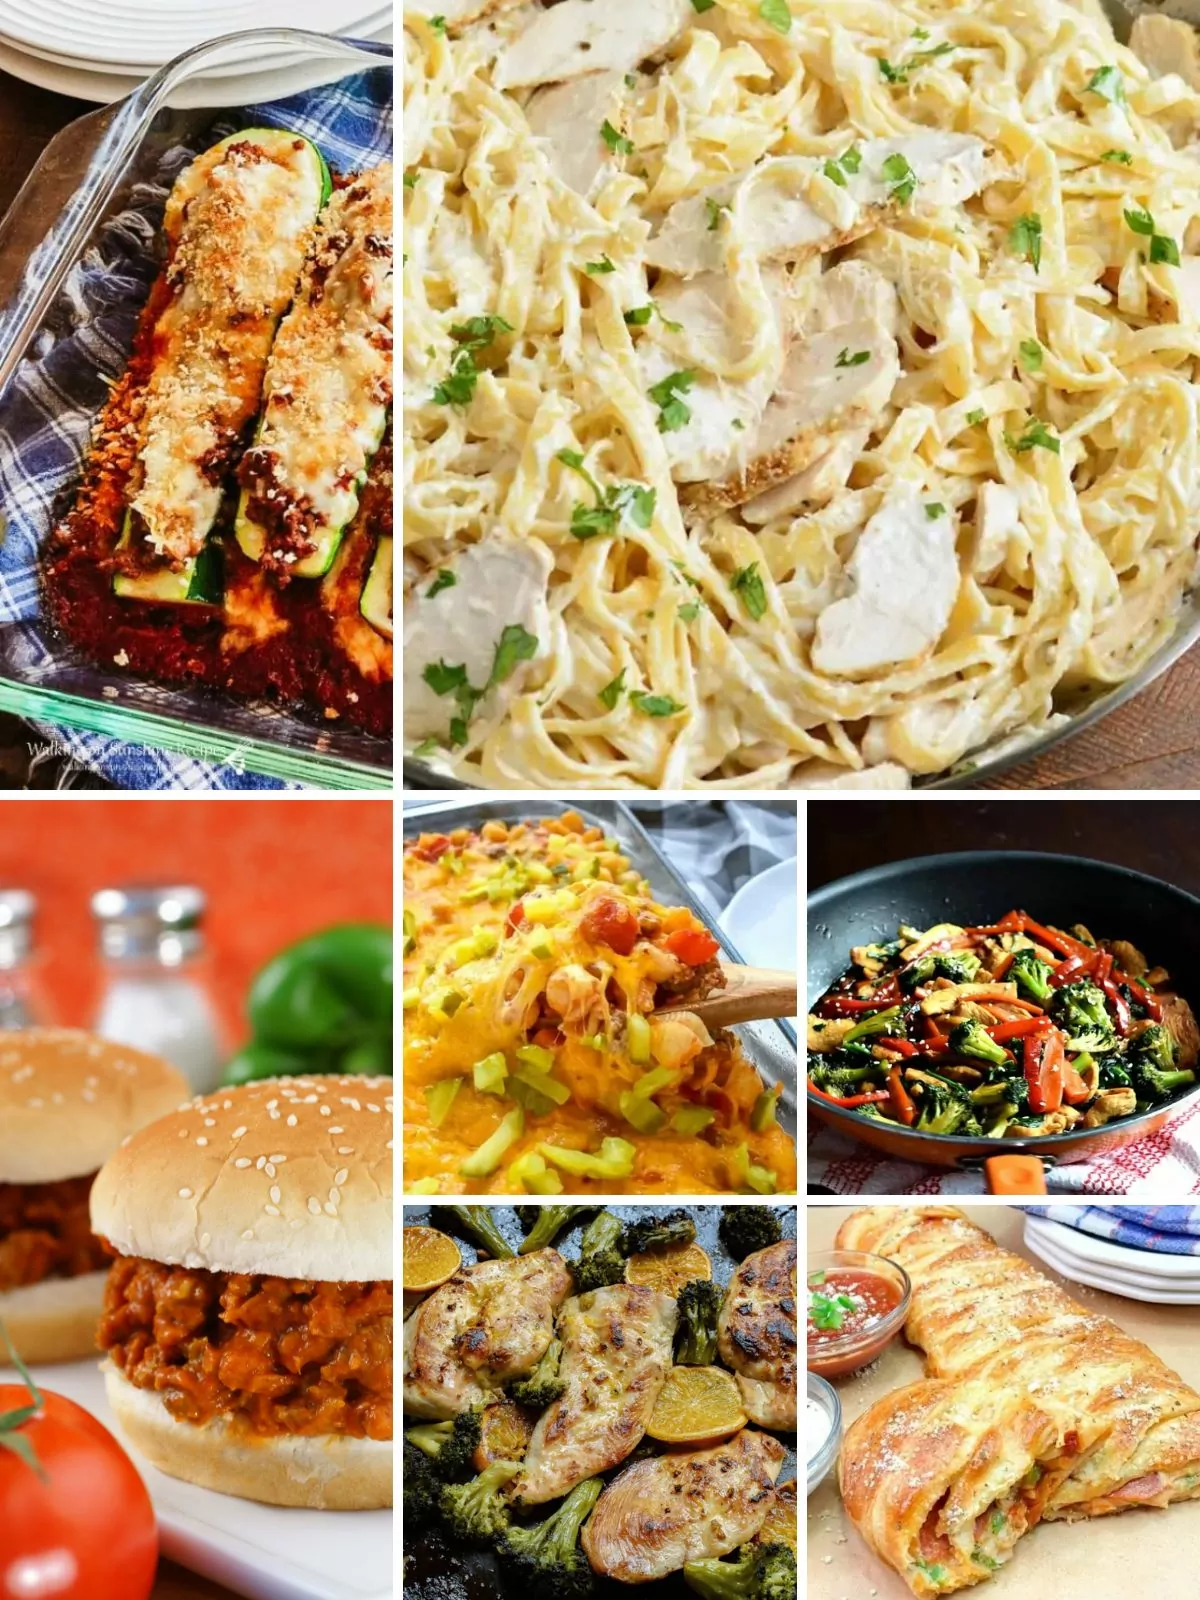 An enticing photo featuring a variety of recipes for an easy meal plan.